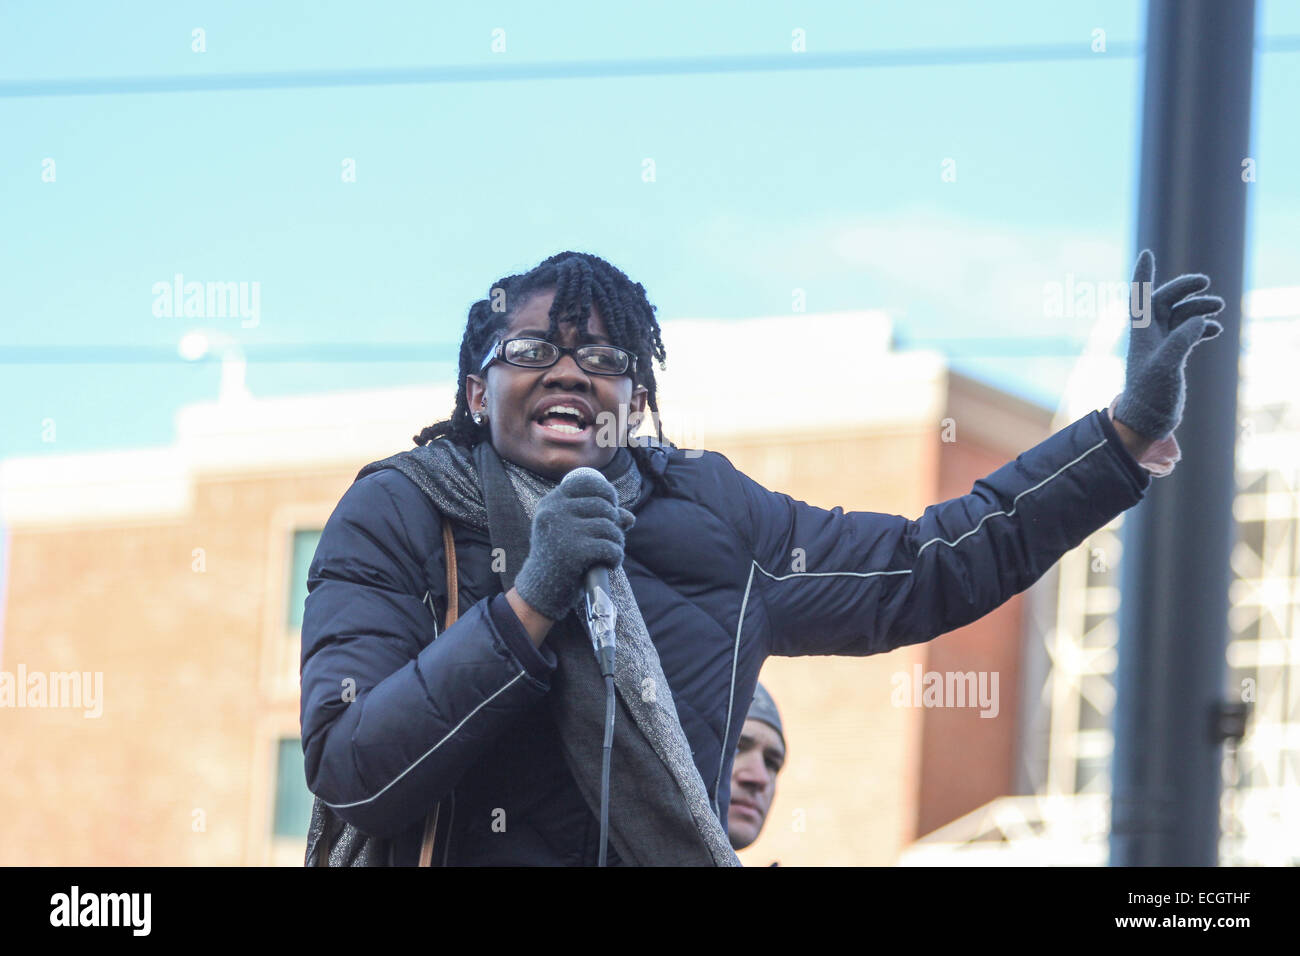 Boston, Massachusetts, USA. 13th December, 2014. A woman speaks during the Millions March rally in Boston, Massachusetts, USA. The protest, like those in other cities throughout the United States on this day, is in response to recent grand jury verdicts not indicting the police officers who  killed unarmed black men Michael Brown and Eric Garner, and to the longstanding problems of racism and police brutality. Credit:  Susan Pease/Alamy Live News Stock Photo